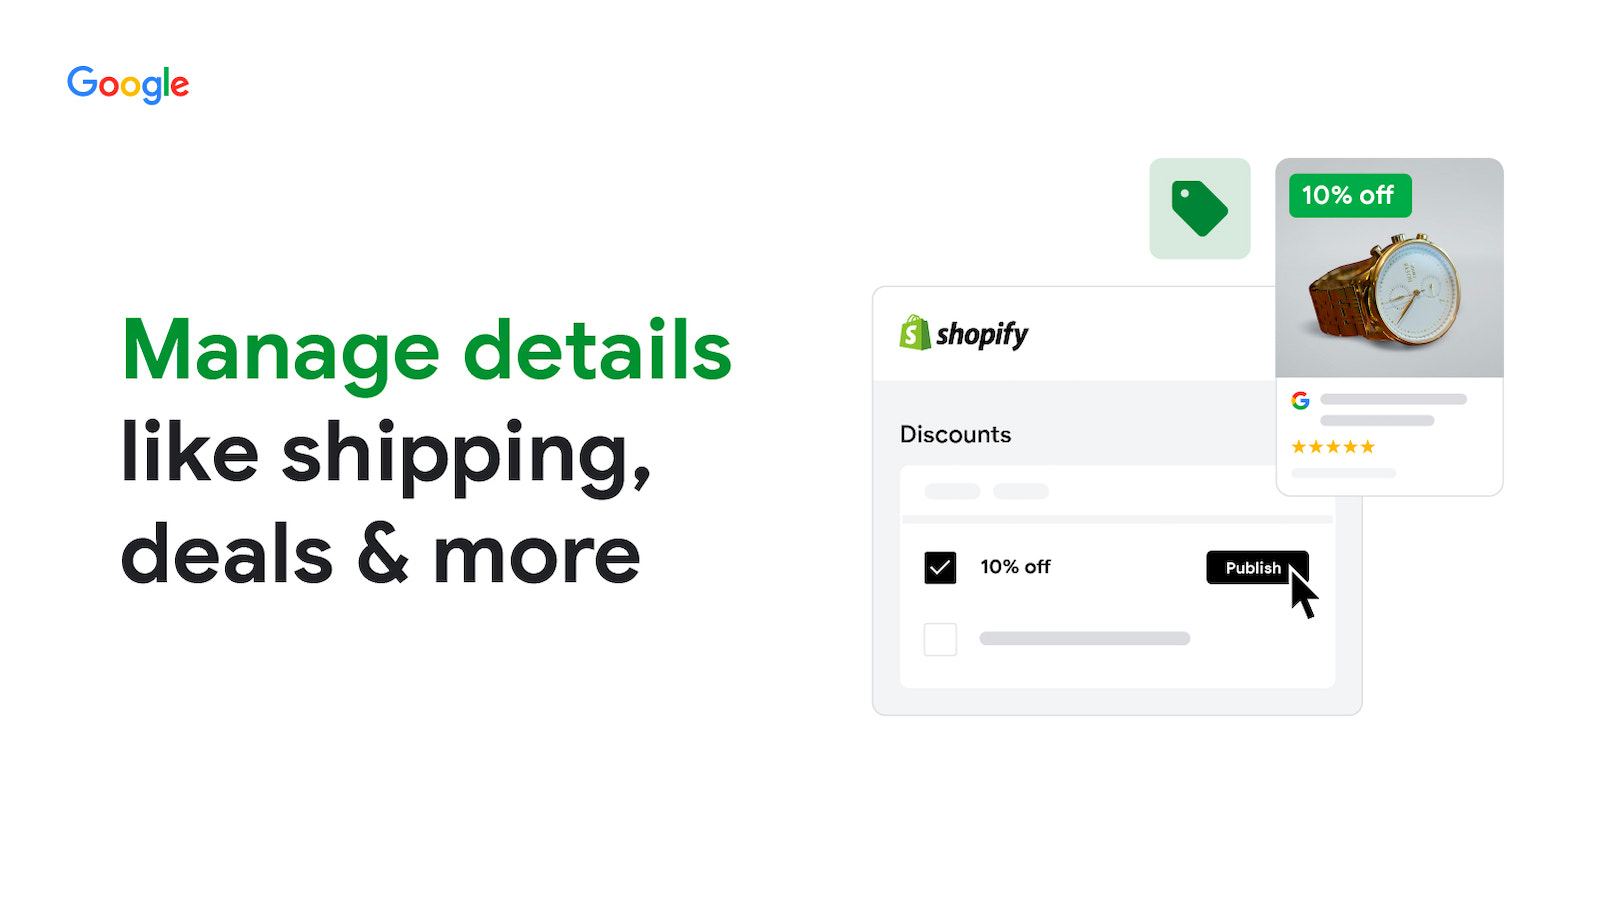 Examples of how to add shipping and discounts to Google